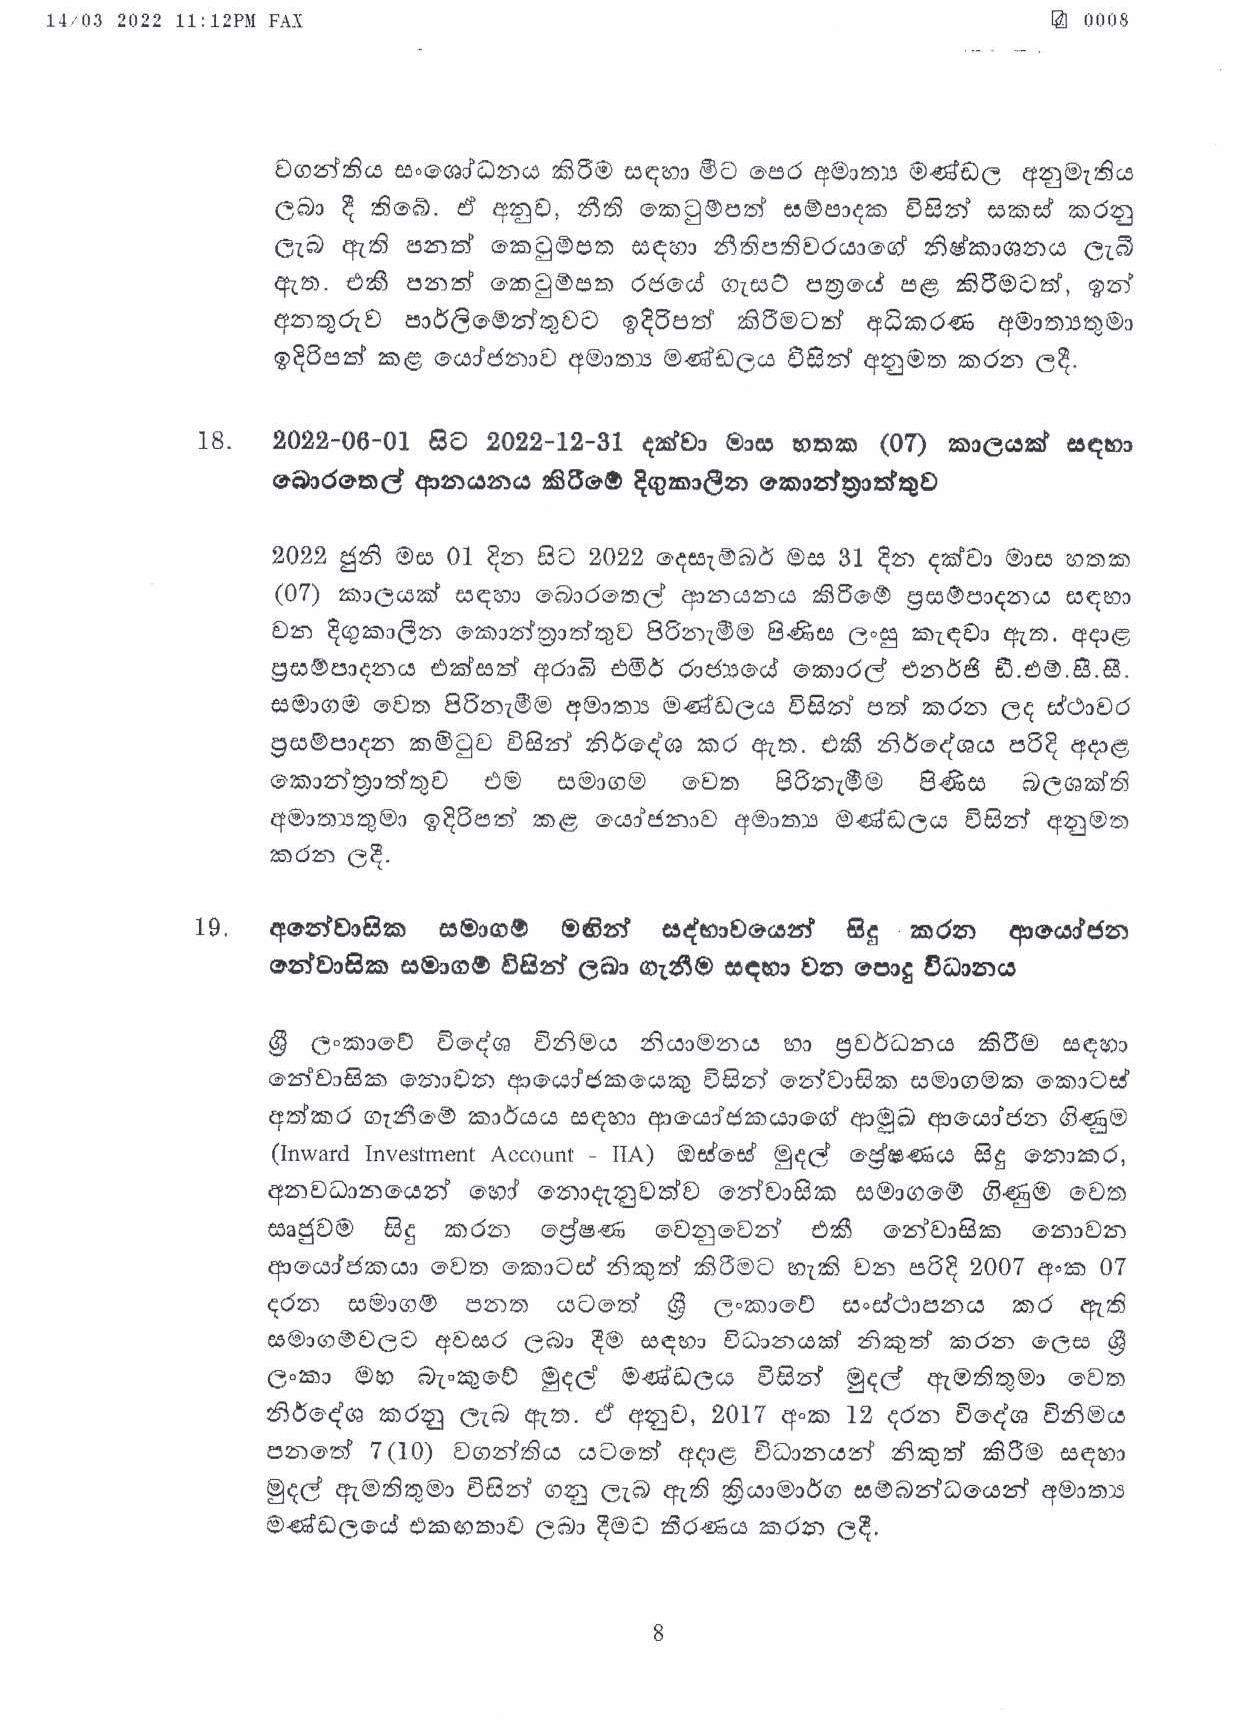 Cabinet Decision on 14.03.2022 page 008